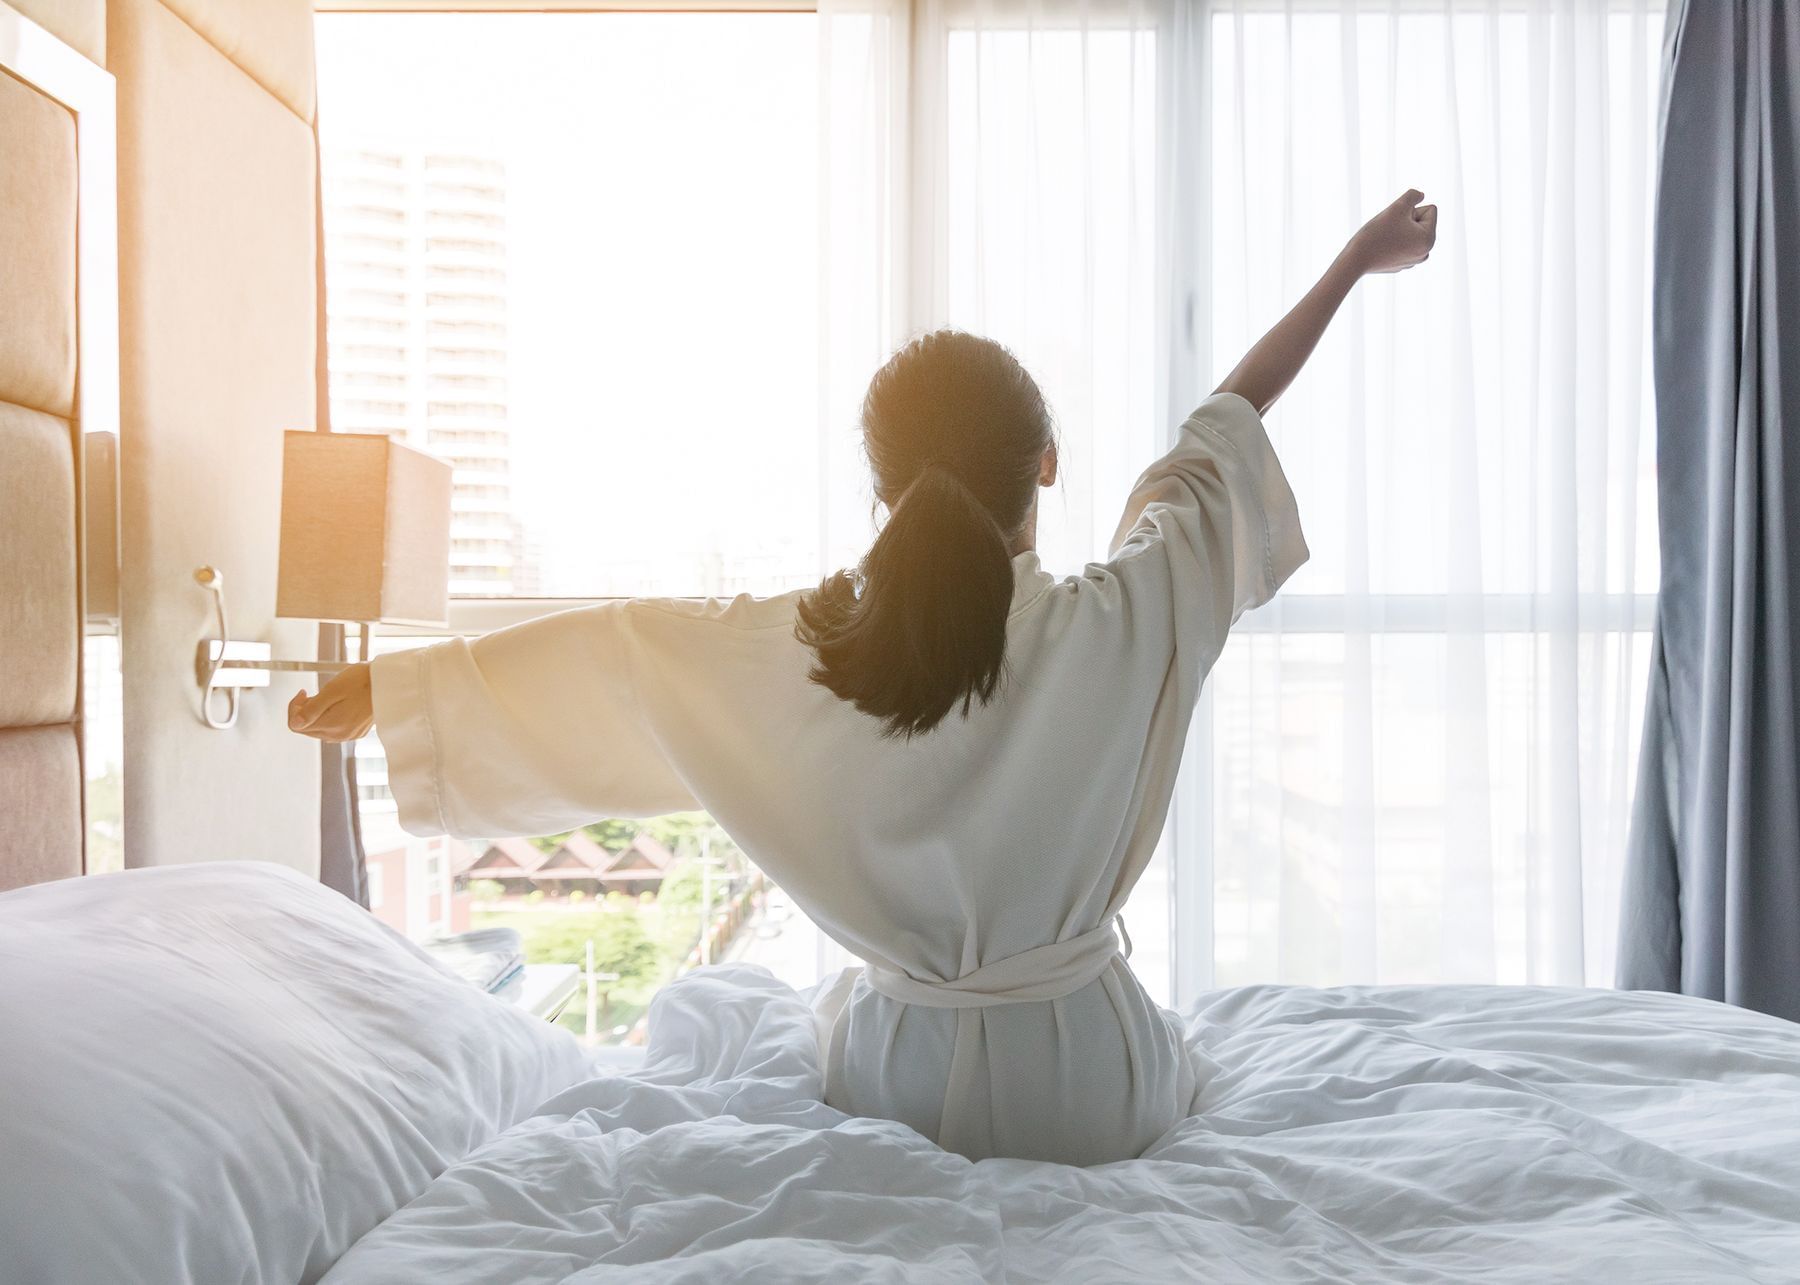 Woman in robe stretching as she rises out of bed